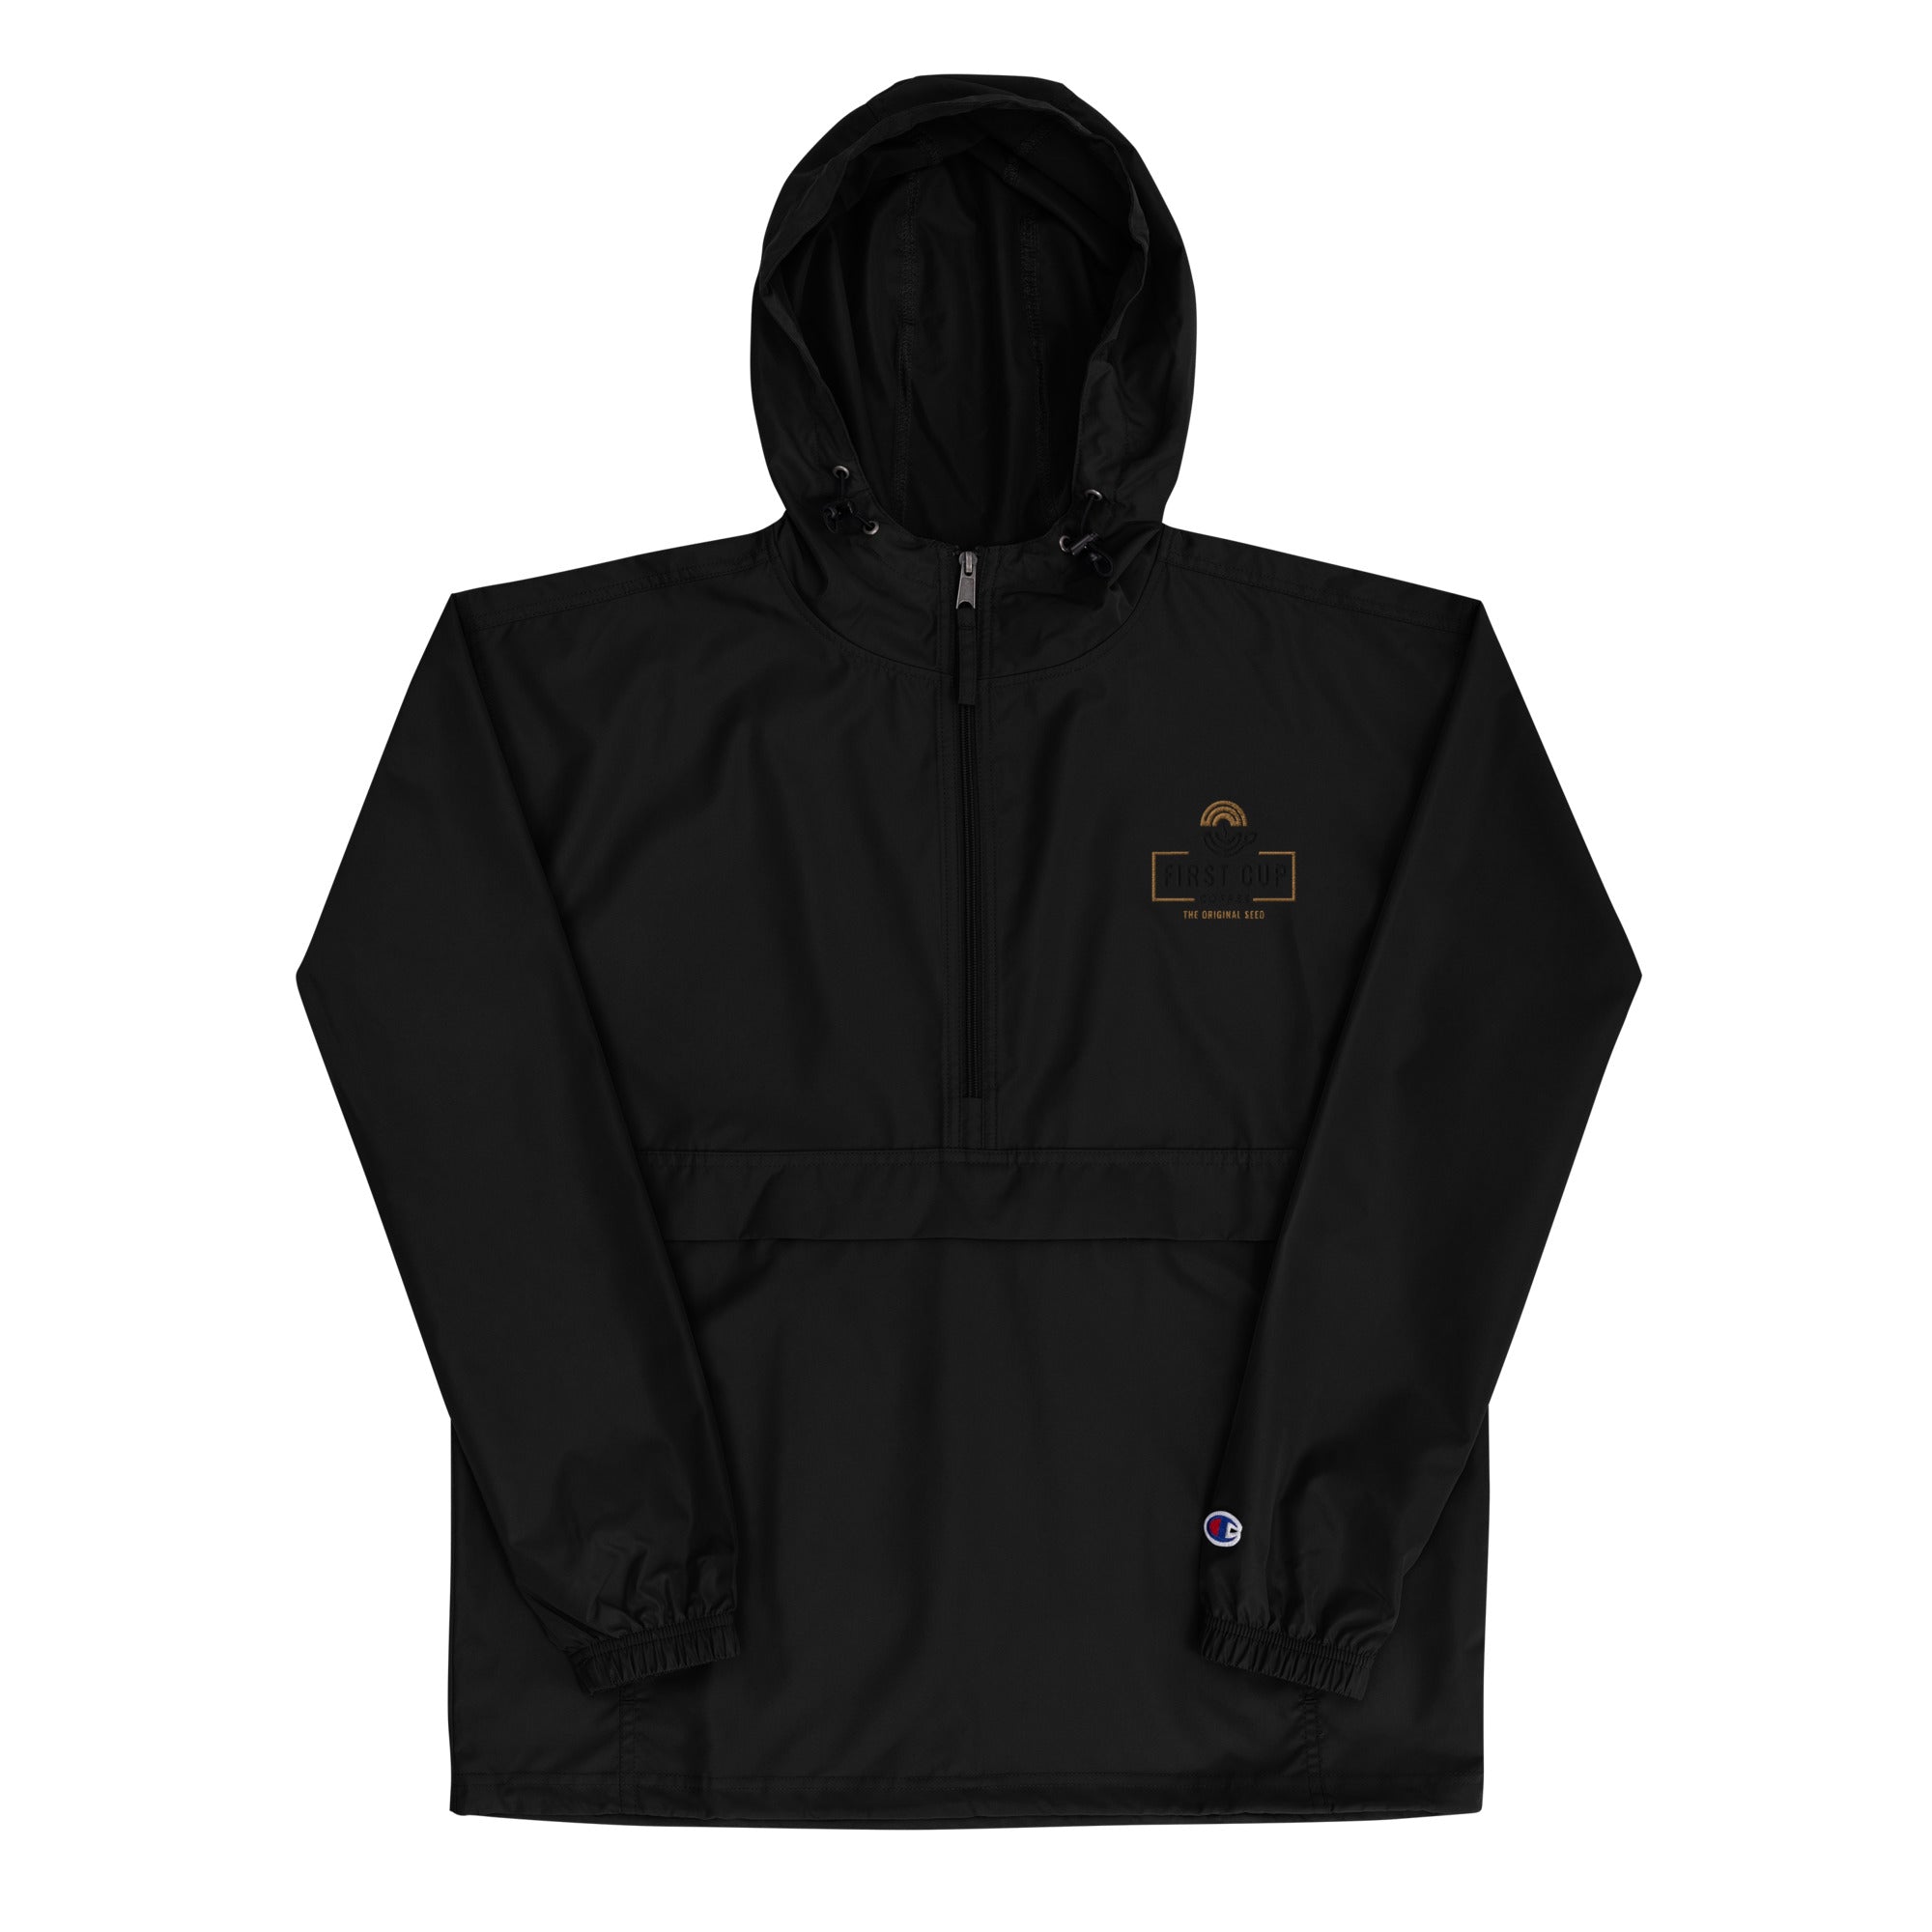 First Cup X Champion Packable Jacket